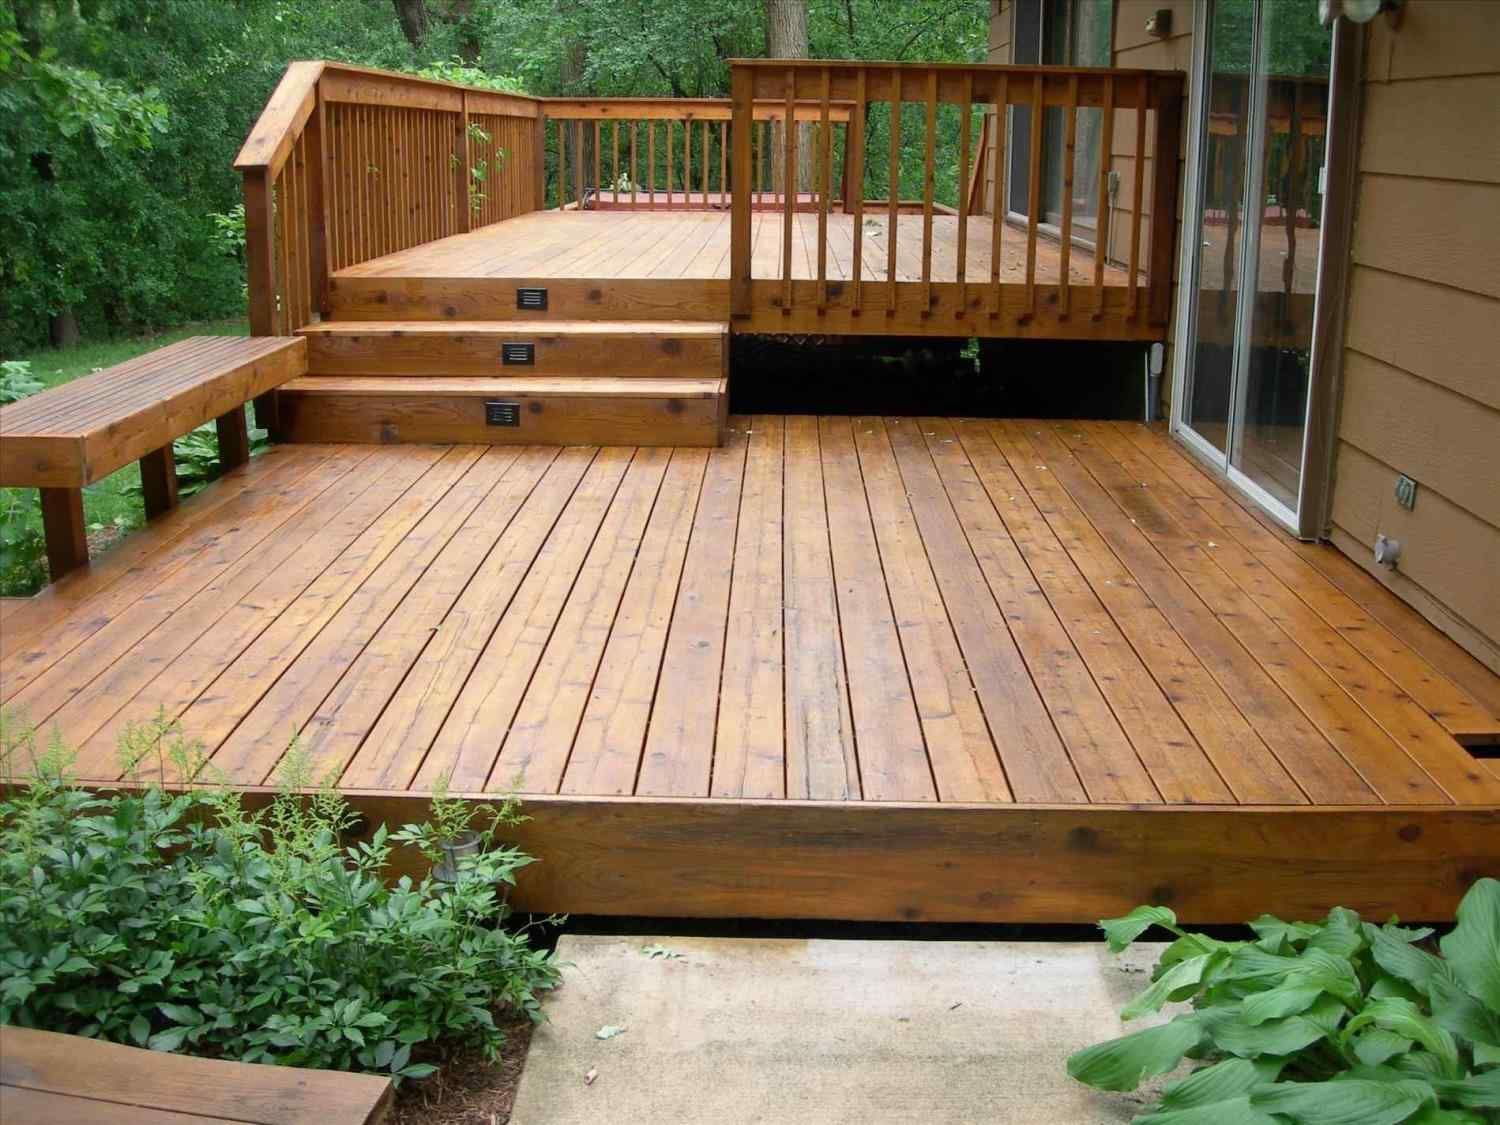 11 DIY Small Deck Ideas On A Budget To Steal From This Project